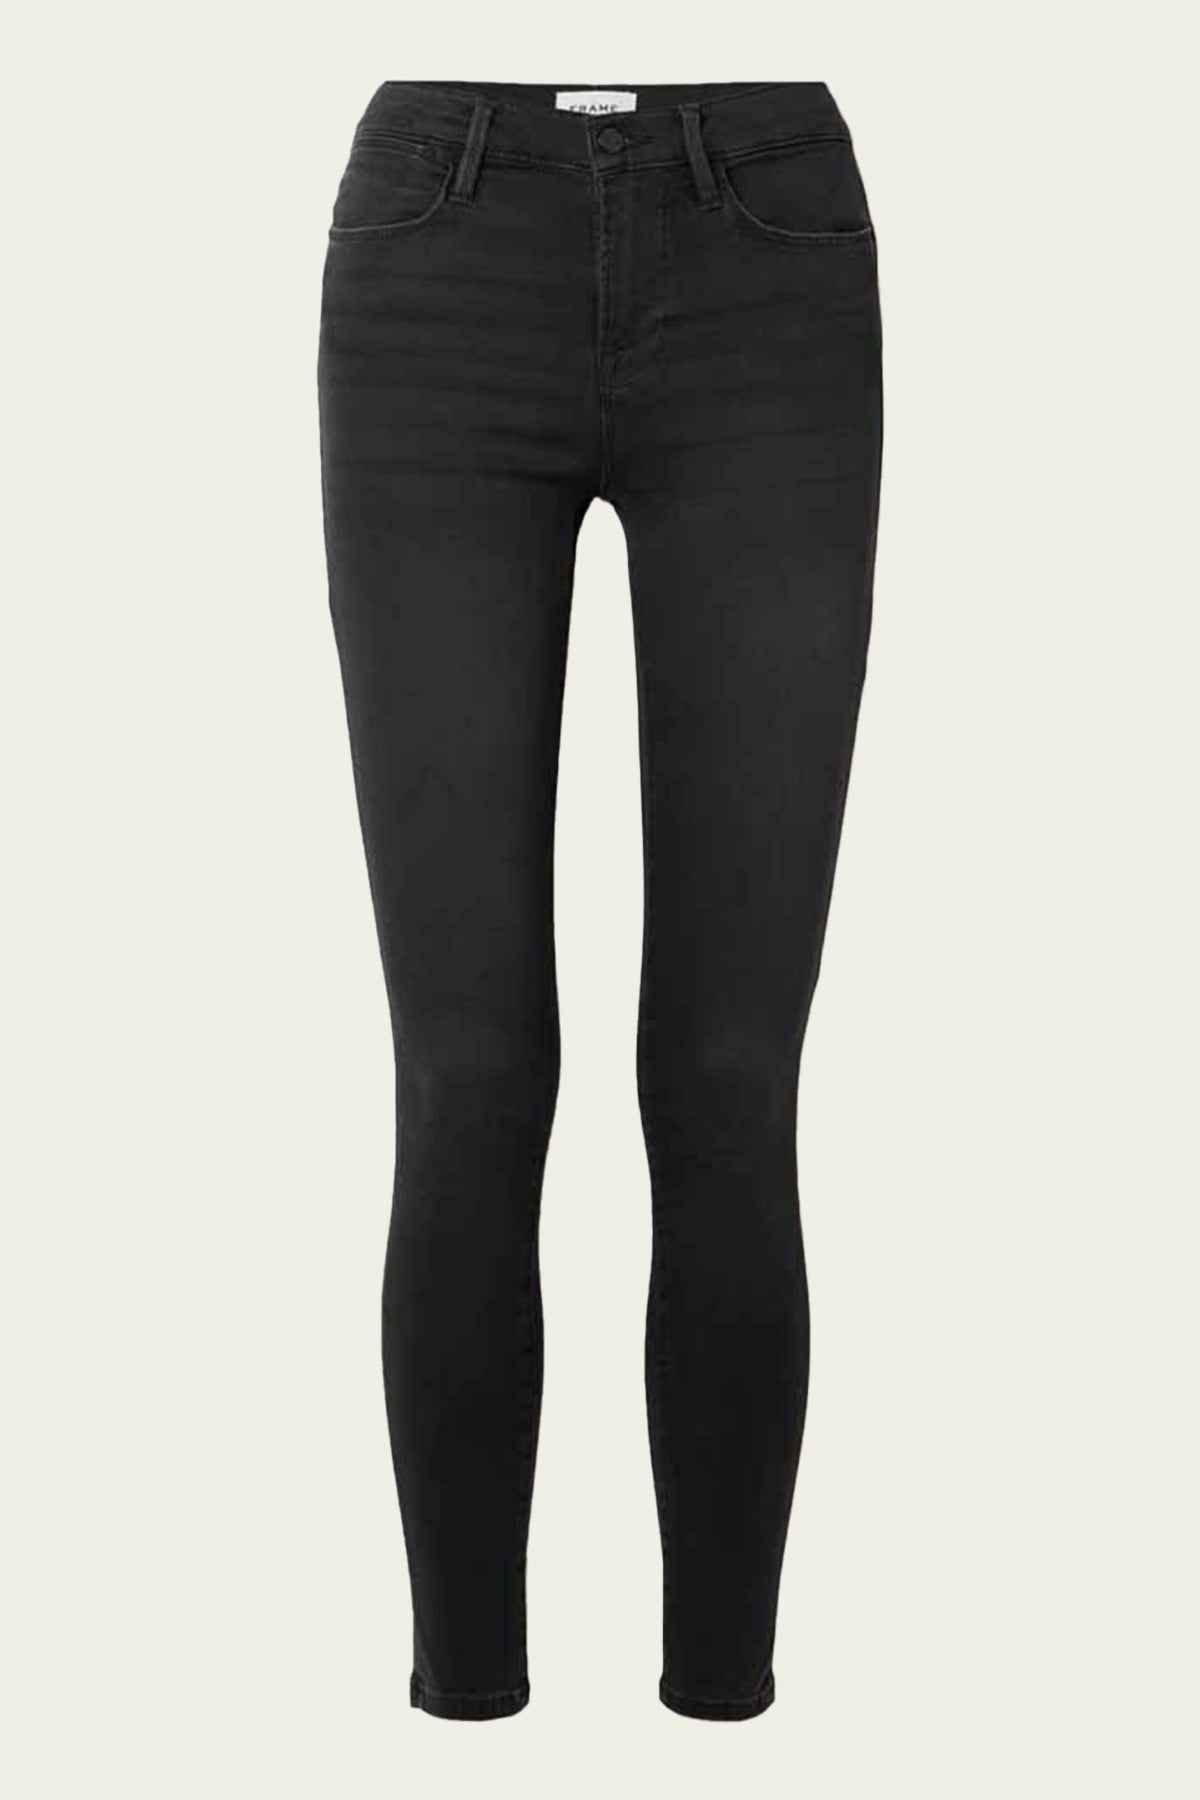 Le High Skinny in Kerry - shop-olivia.com